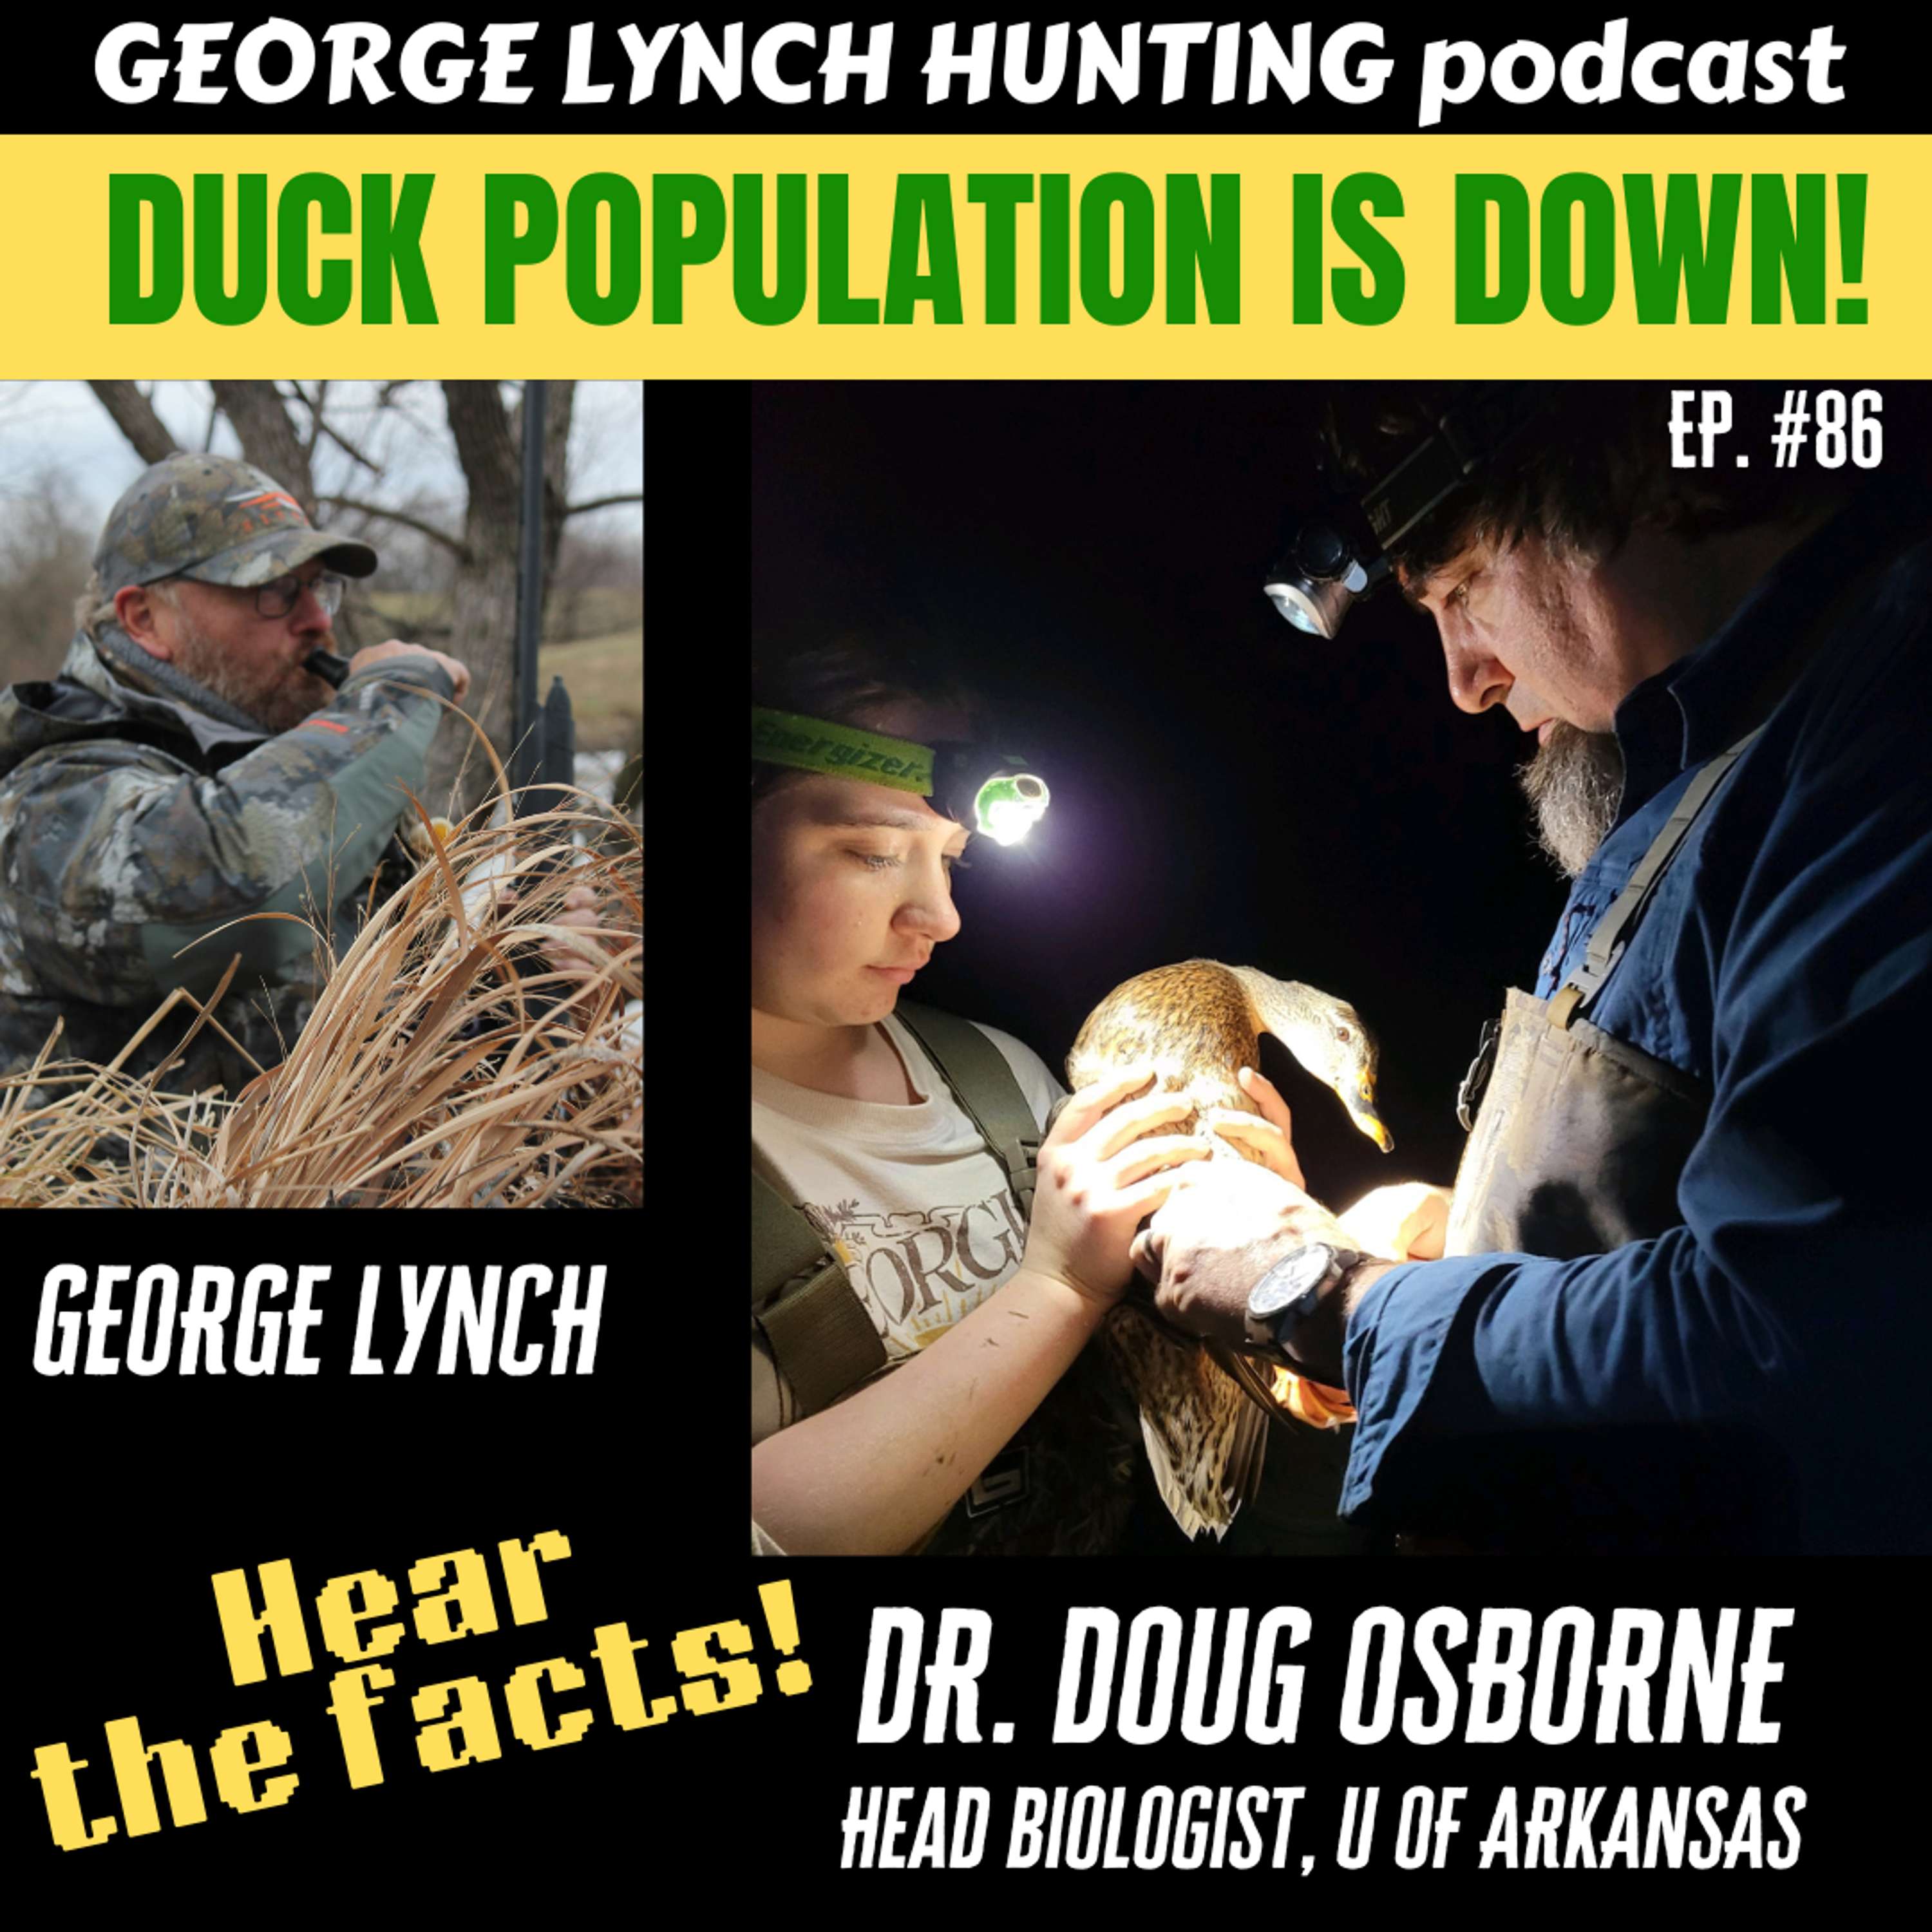 DUCK POPULATION is DOWN! Hear the Facts from DR. DOUG OSBORNE, Head Biologist at Univ of Arkansas